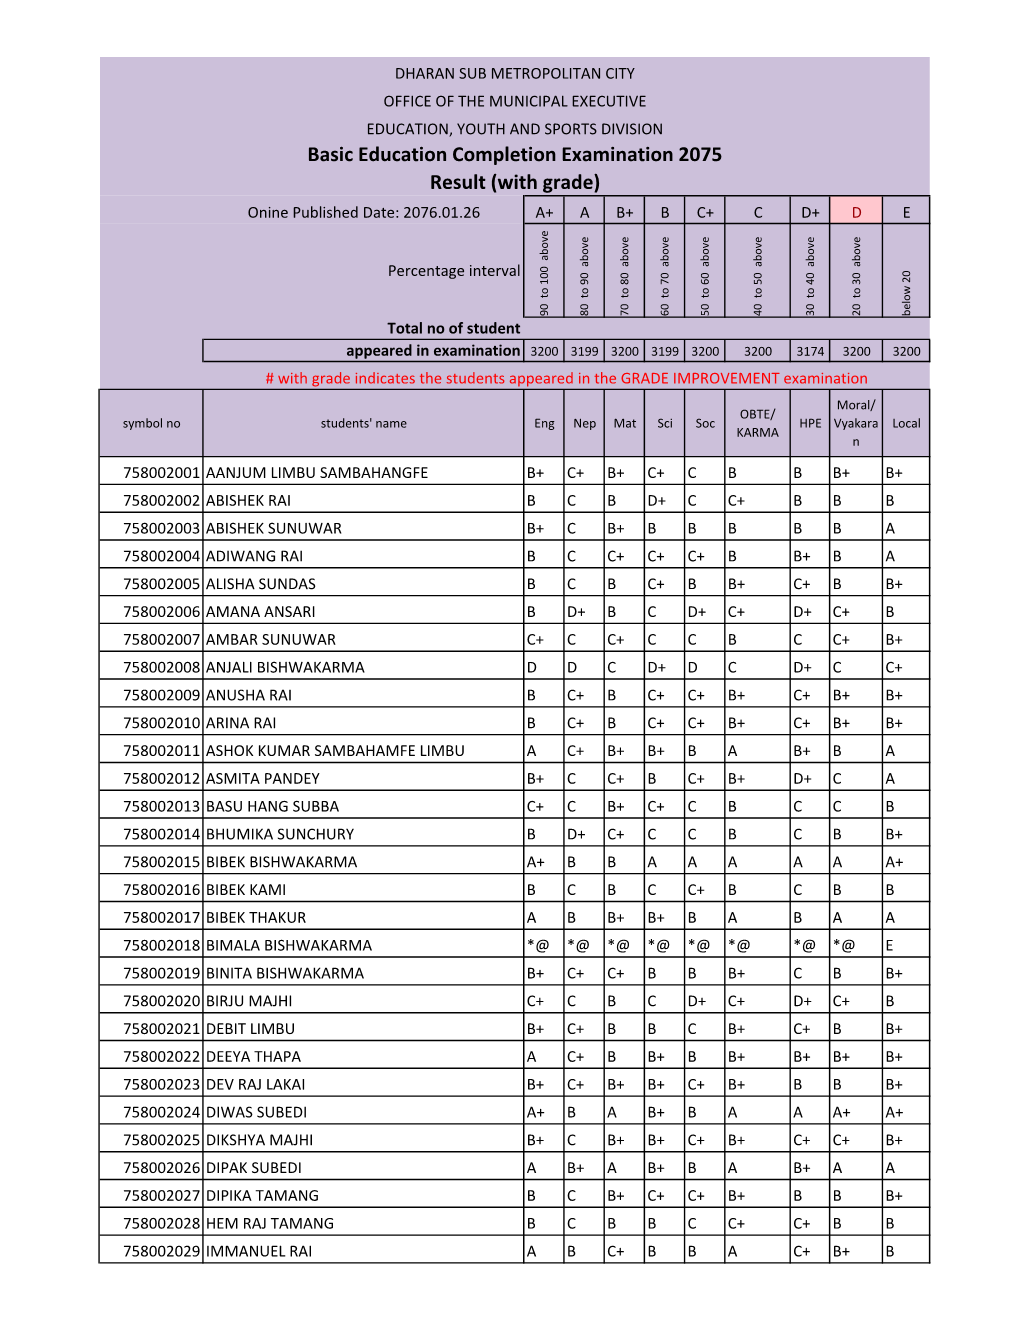 Basic Education Completion Examination 2075 Result (With Grade) Onine Published Date: 2076.01.26 A+ a B+ B C+ C D+ D E